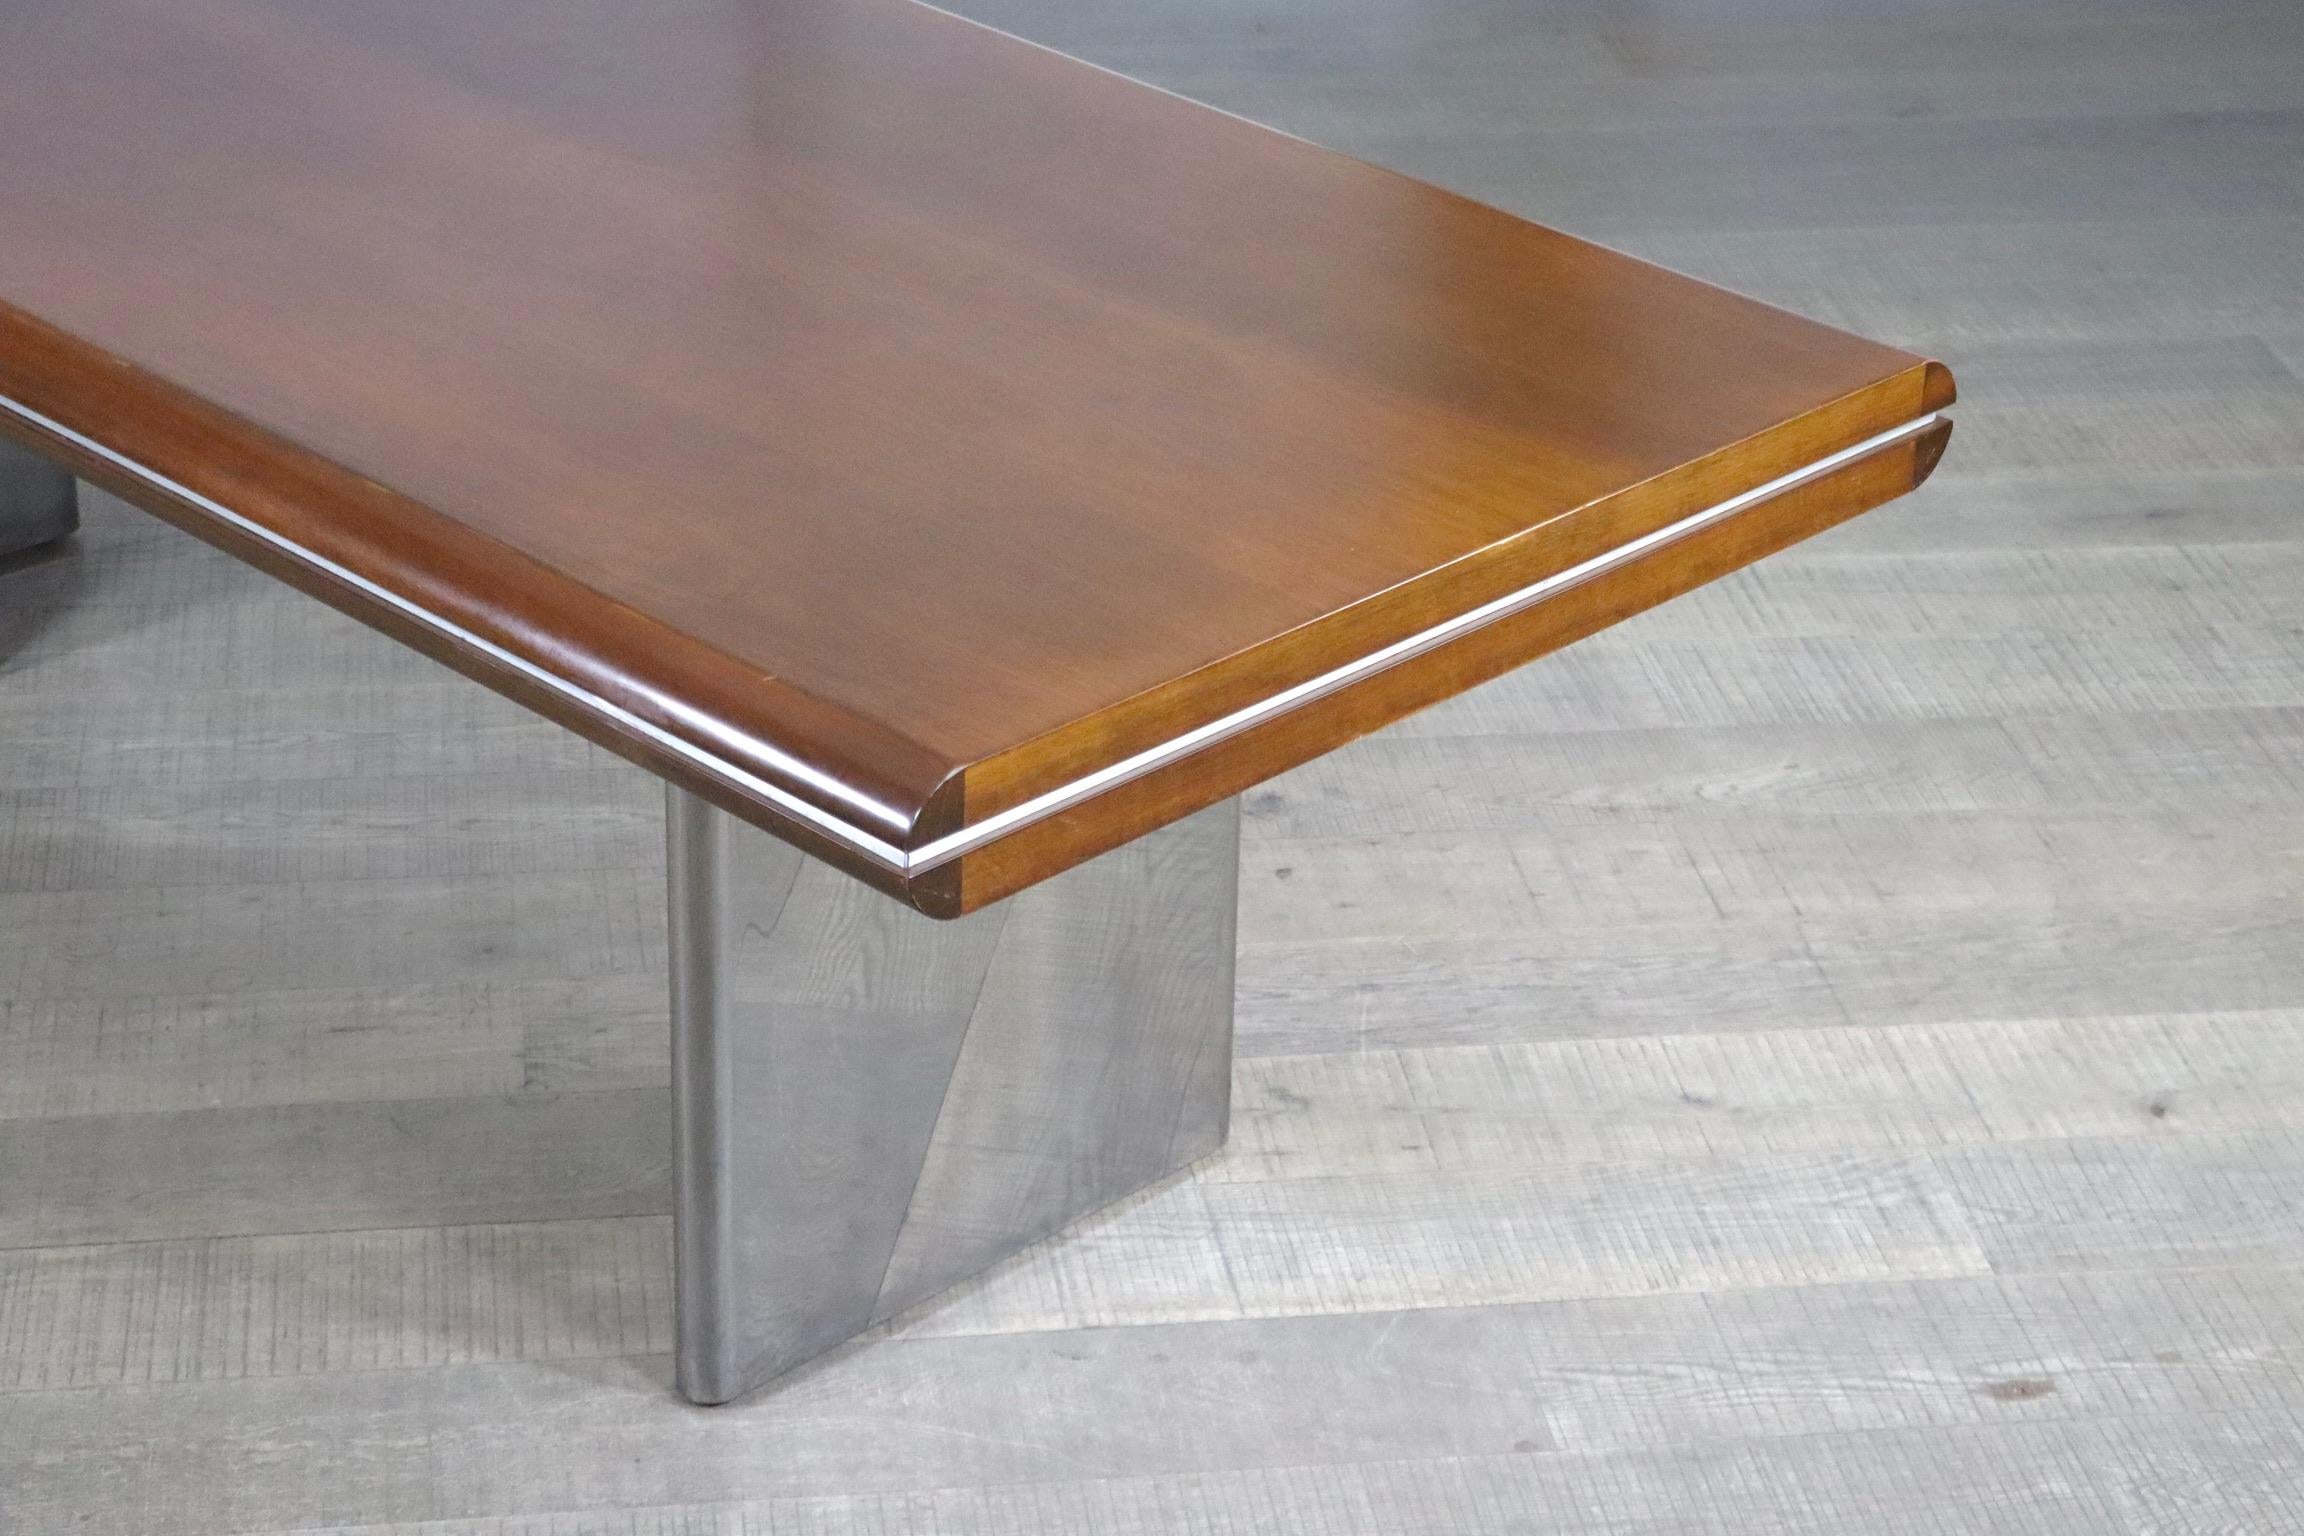 Rare Large Executive Desk By Hans Von Klier For Skipper, Italy 1970s For Sale 7